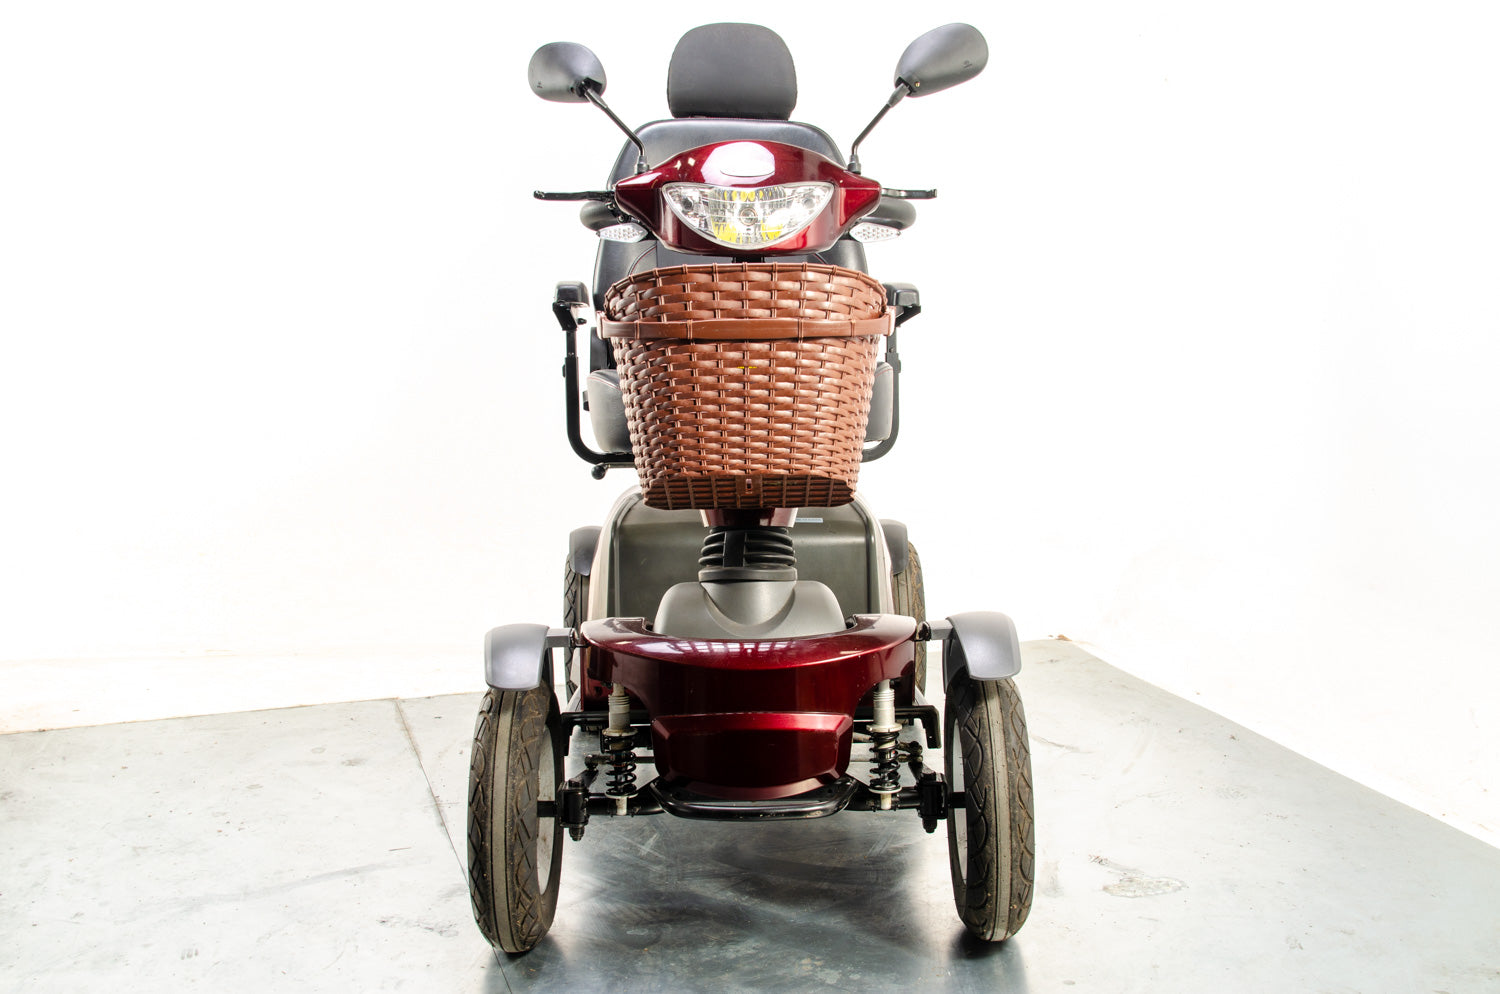 Eden Roadmaster Plus All-Terrain Off-Road Used Mobility Scooter 8mph Luxury Electric Large 13603